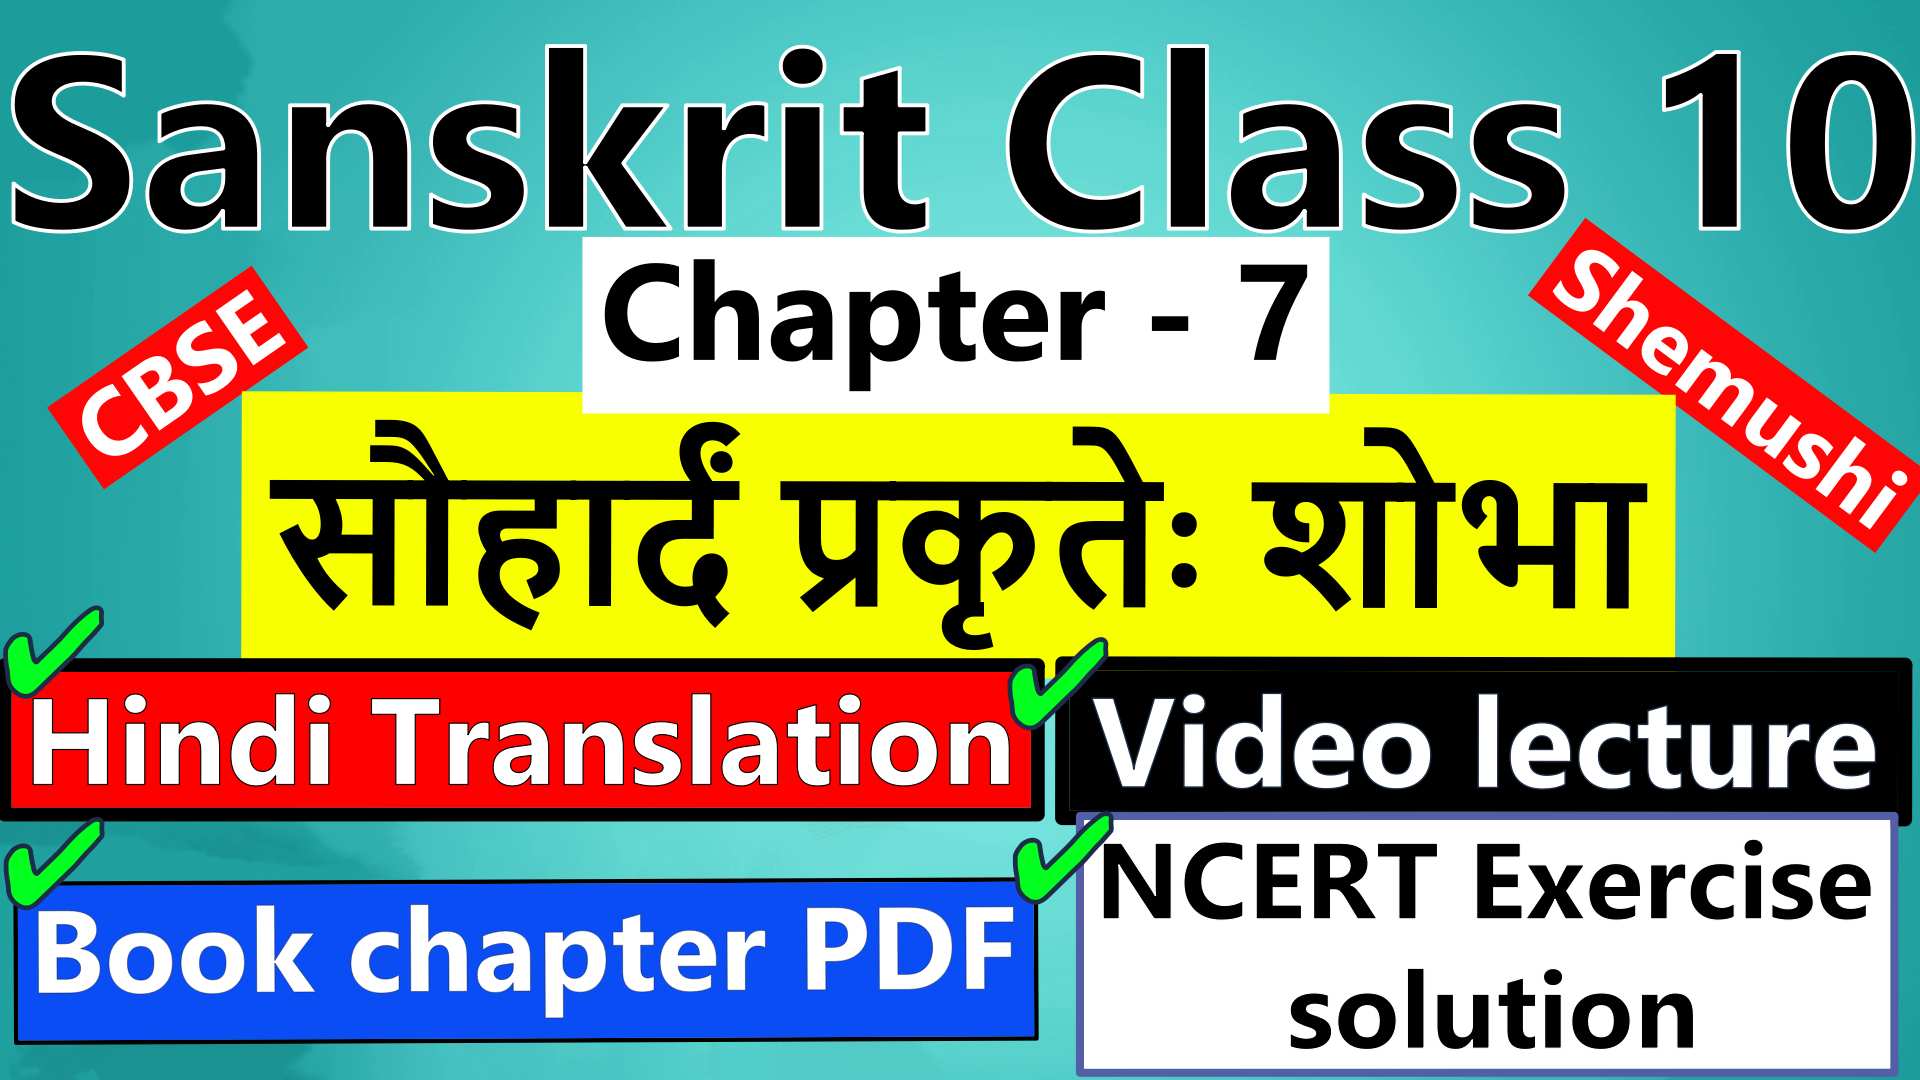 sanskrit-class-10-chapter-7-सौहार्दं-प्रकृतेः-शोभा-Hindi-Translation-Video-lecture-NCERT-Exercise-Solution-Question-Answer-Book-chapter-PDF